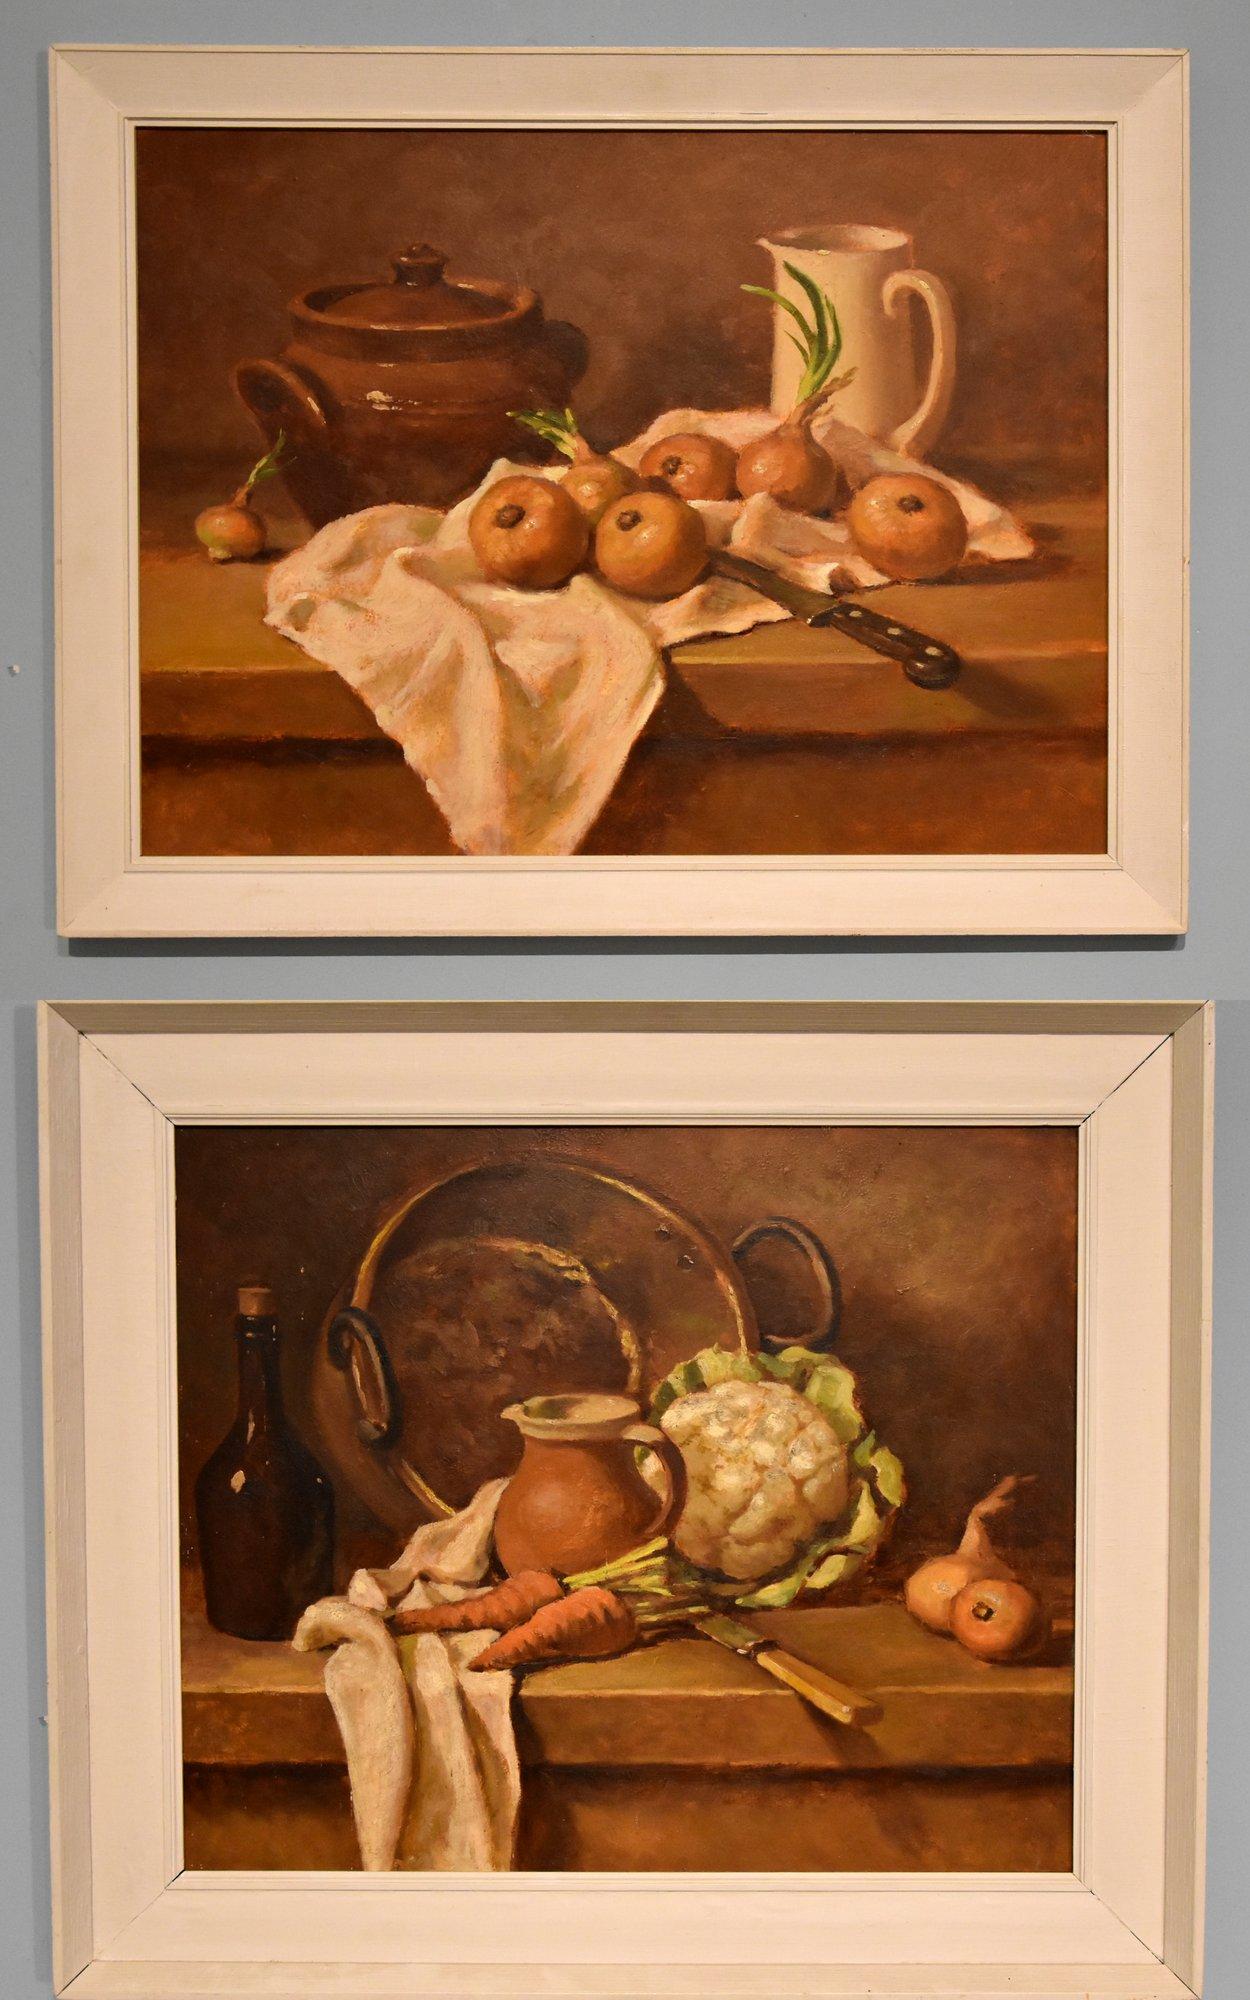 Oil Painting by John J Hall "Pair of Pantry Scenes" 1921 - 2006 Studio labels verso. Hall went to college of Arts and Crafts and taught at the Cambridge school of arts. Oil on board.

Paintings of different sizes:
Dimensions paintings 1.    21 x 27